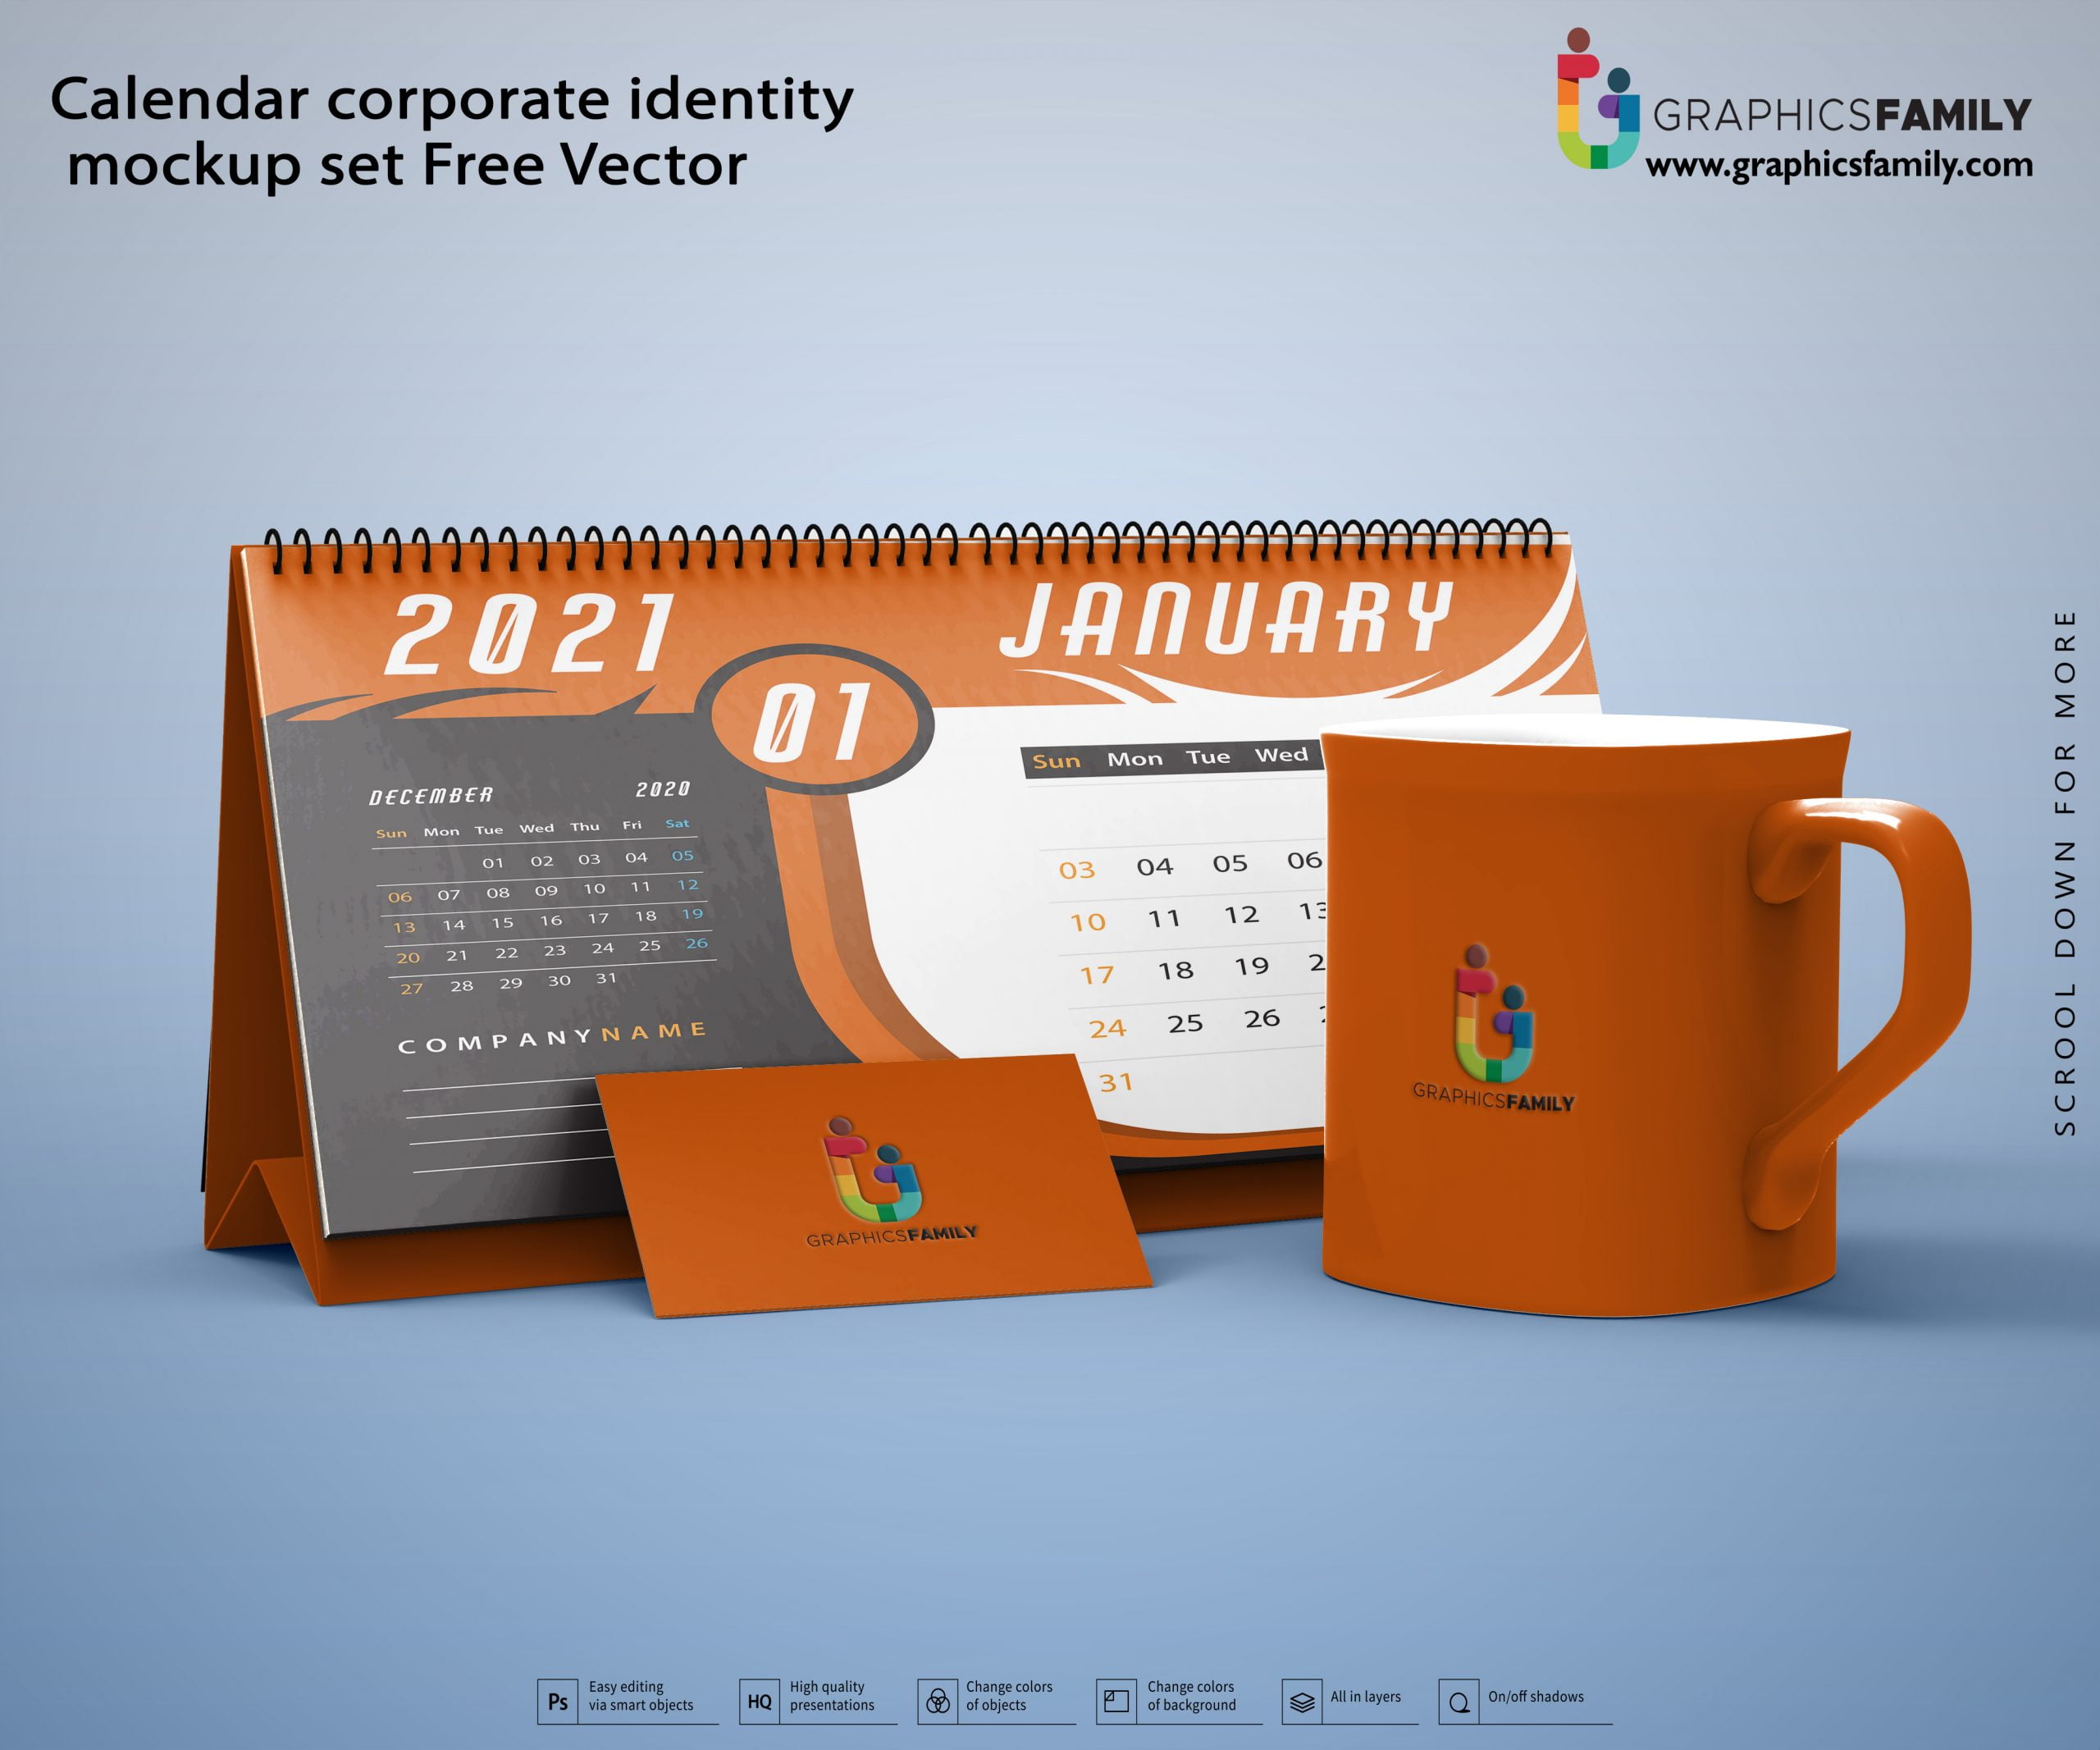 Download Calendar corporate identity mockup set Free Vector - GraphicsFamily